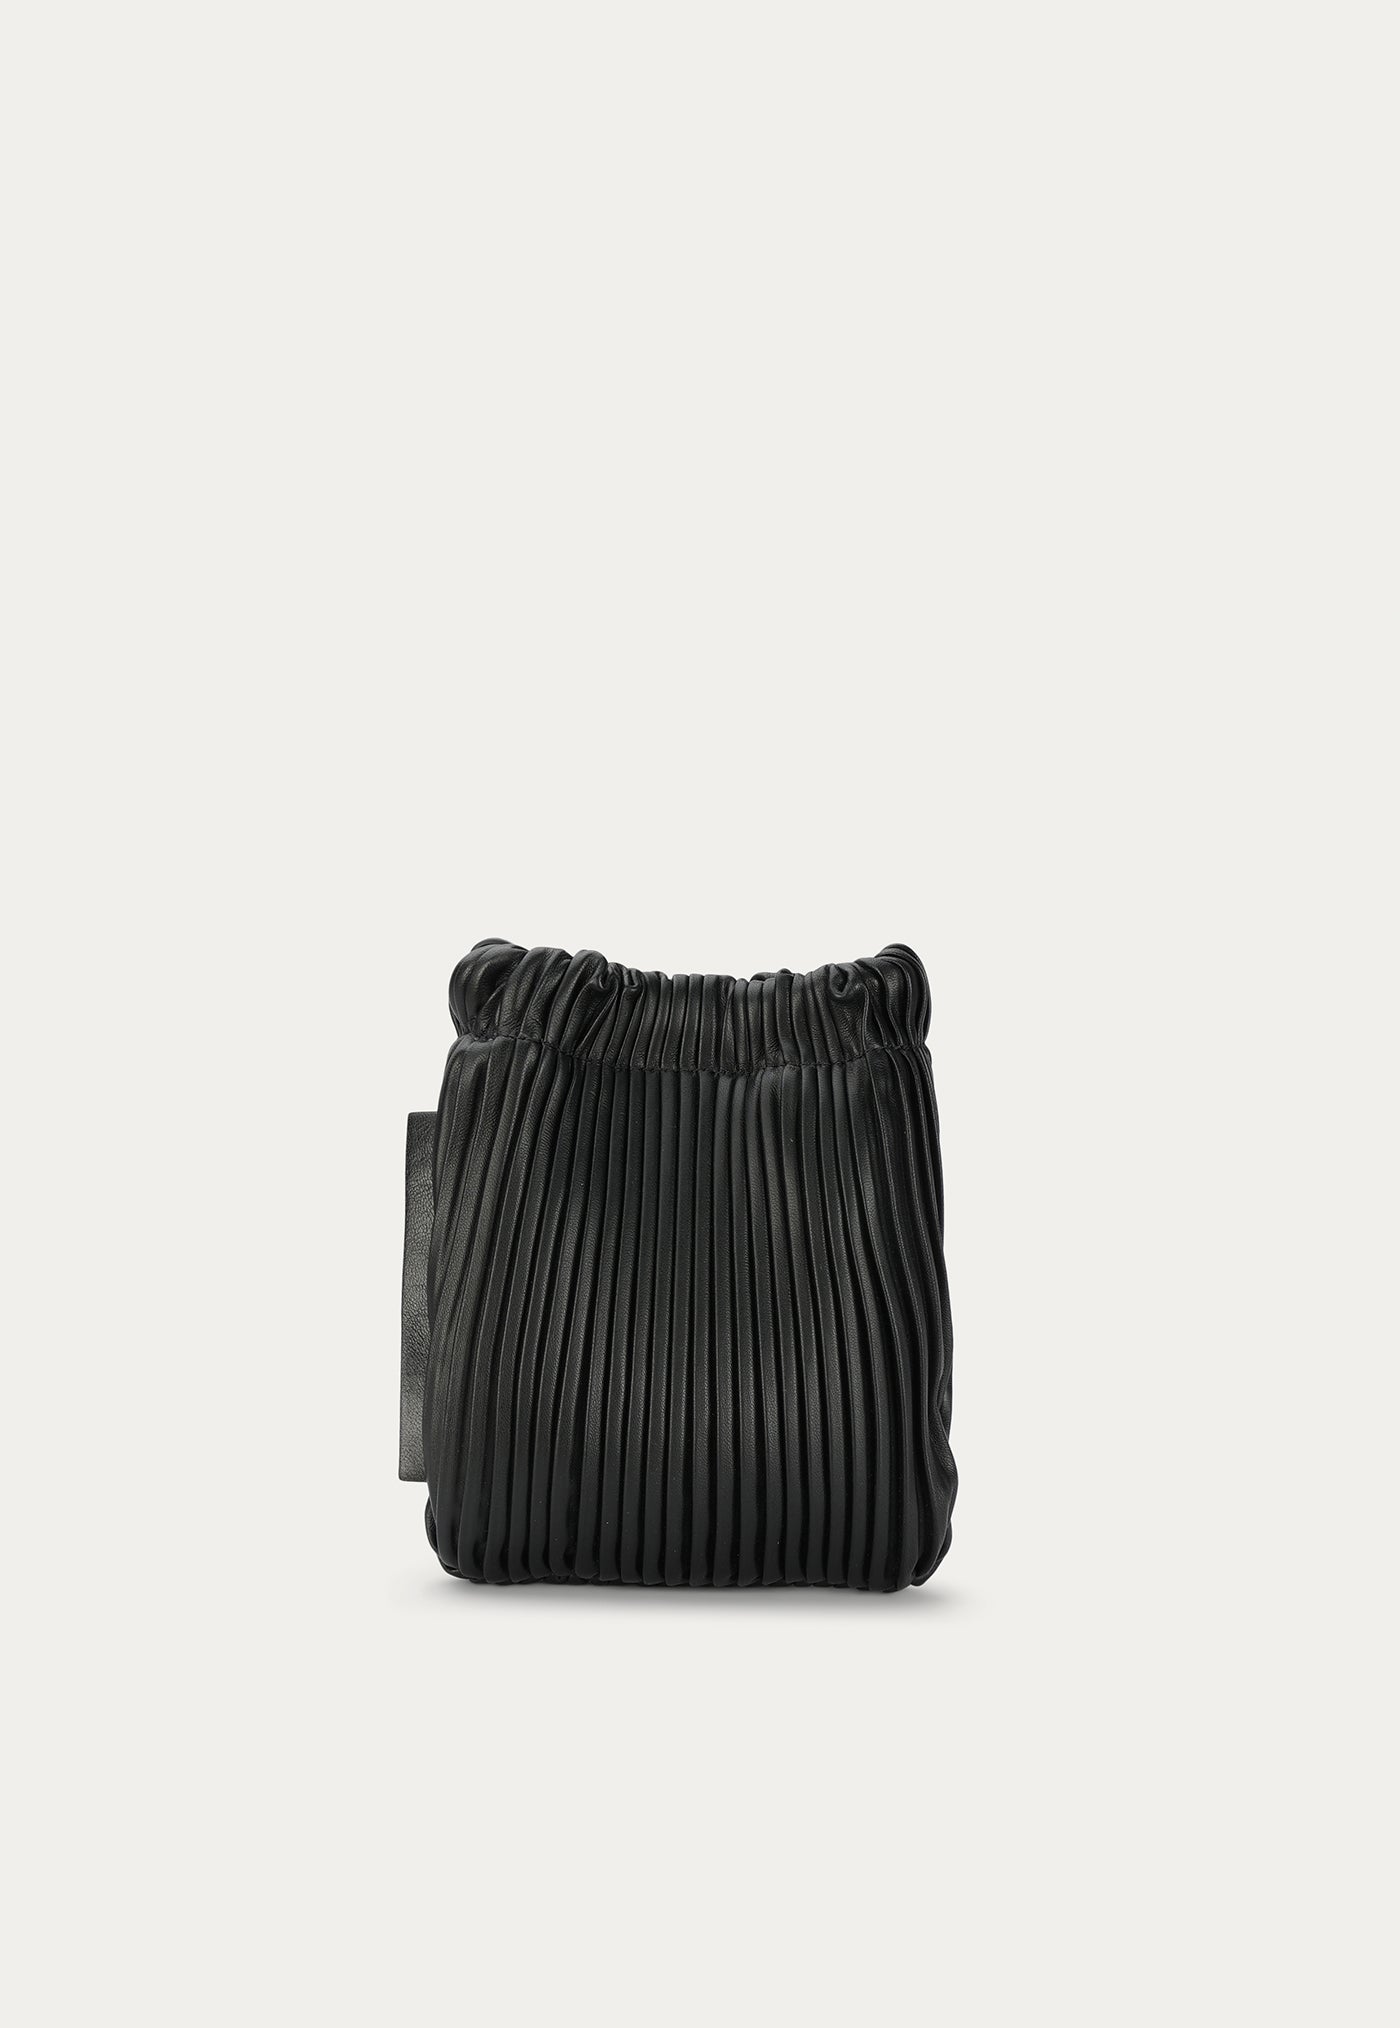 Mr Cinch Pouch - Black Pleated sold by Angel Divine